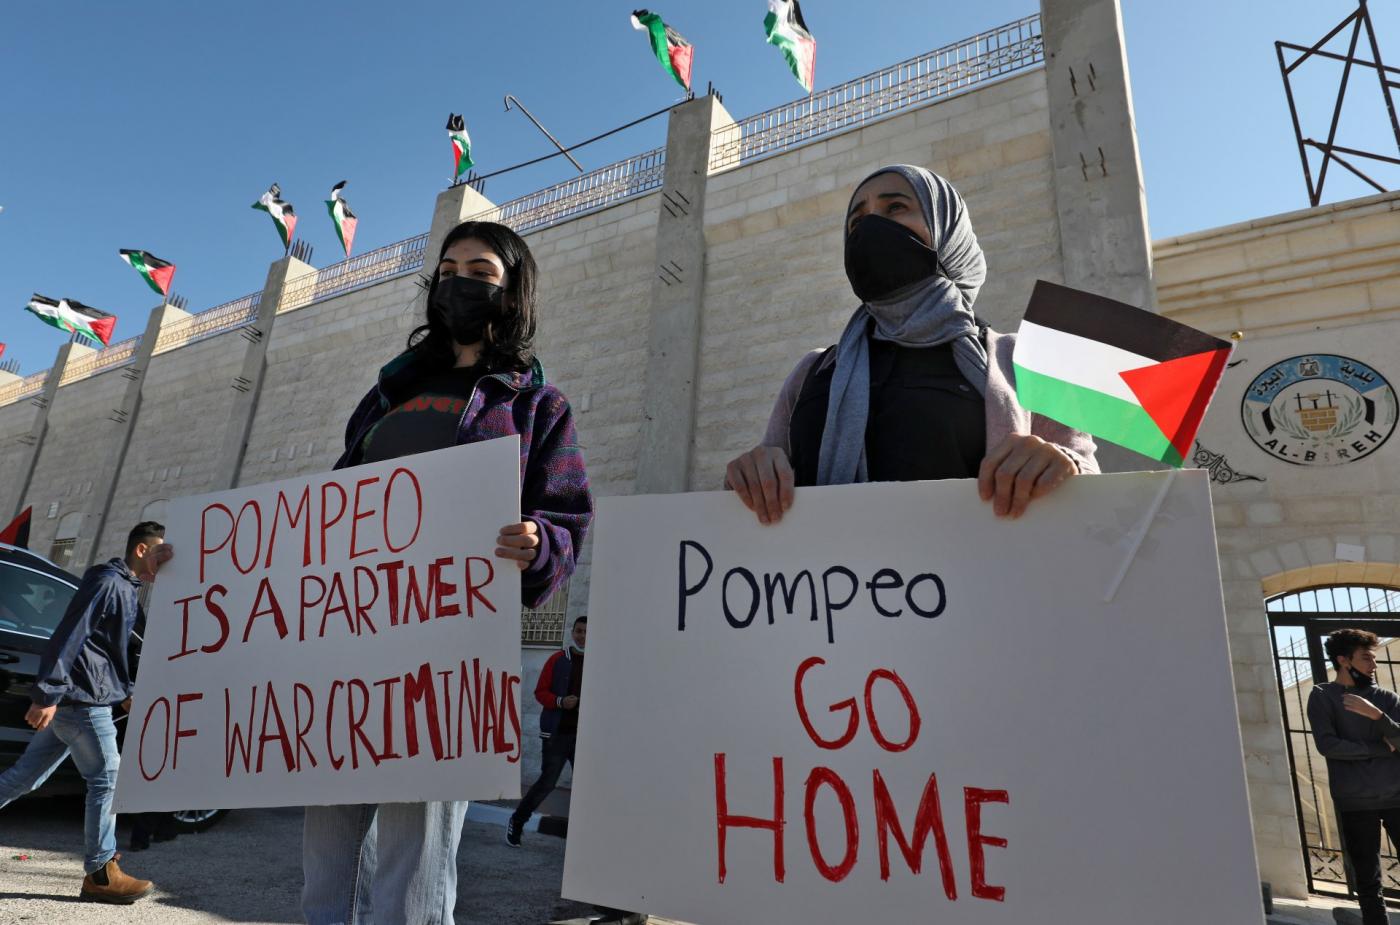 Palestinians protest against Pompeo’s visit to Israeli settlements